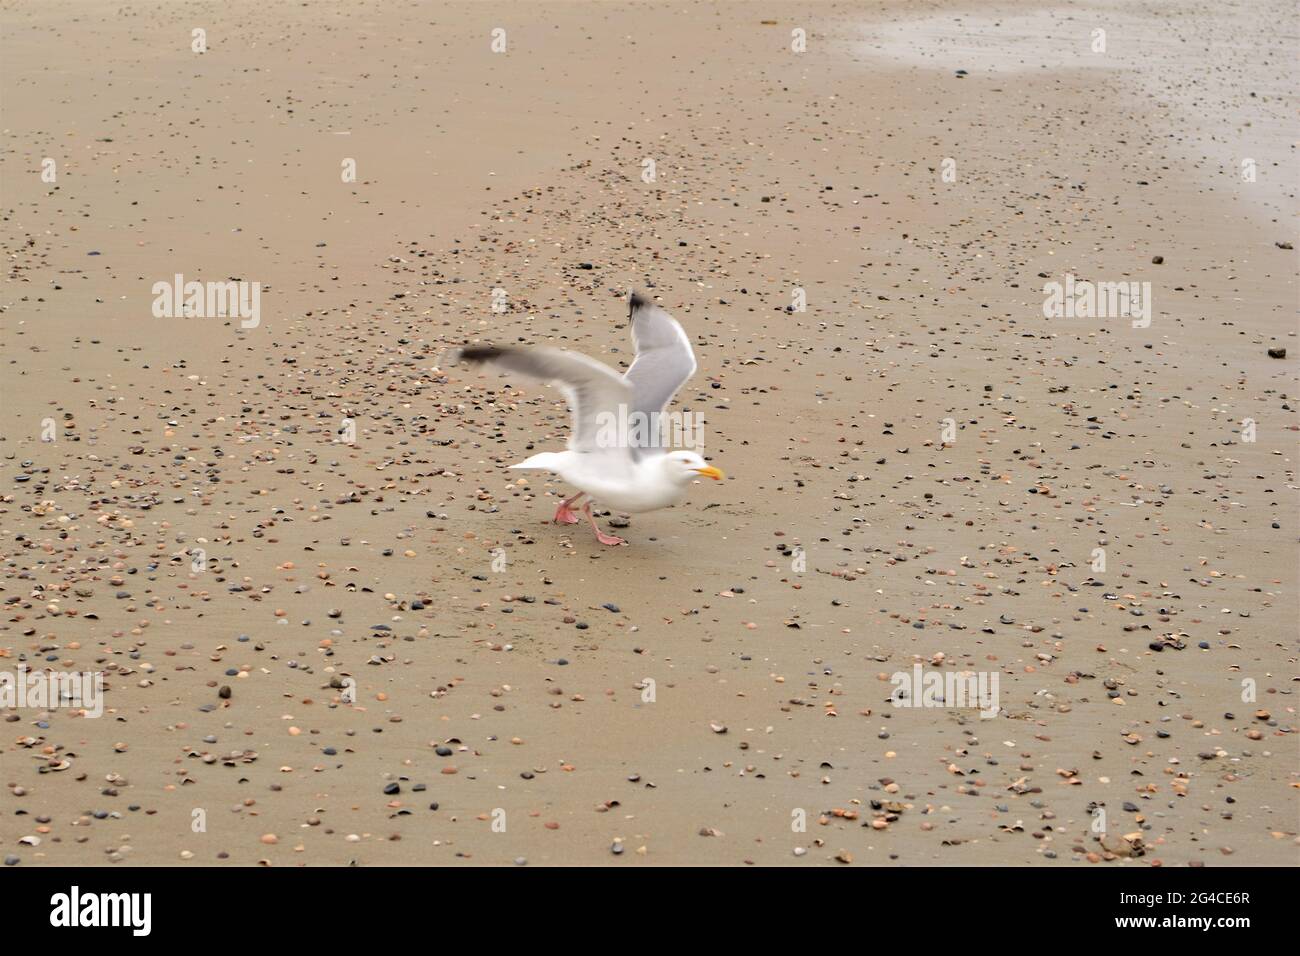 A seagull starts to fly Stock Photo